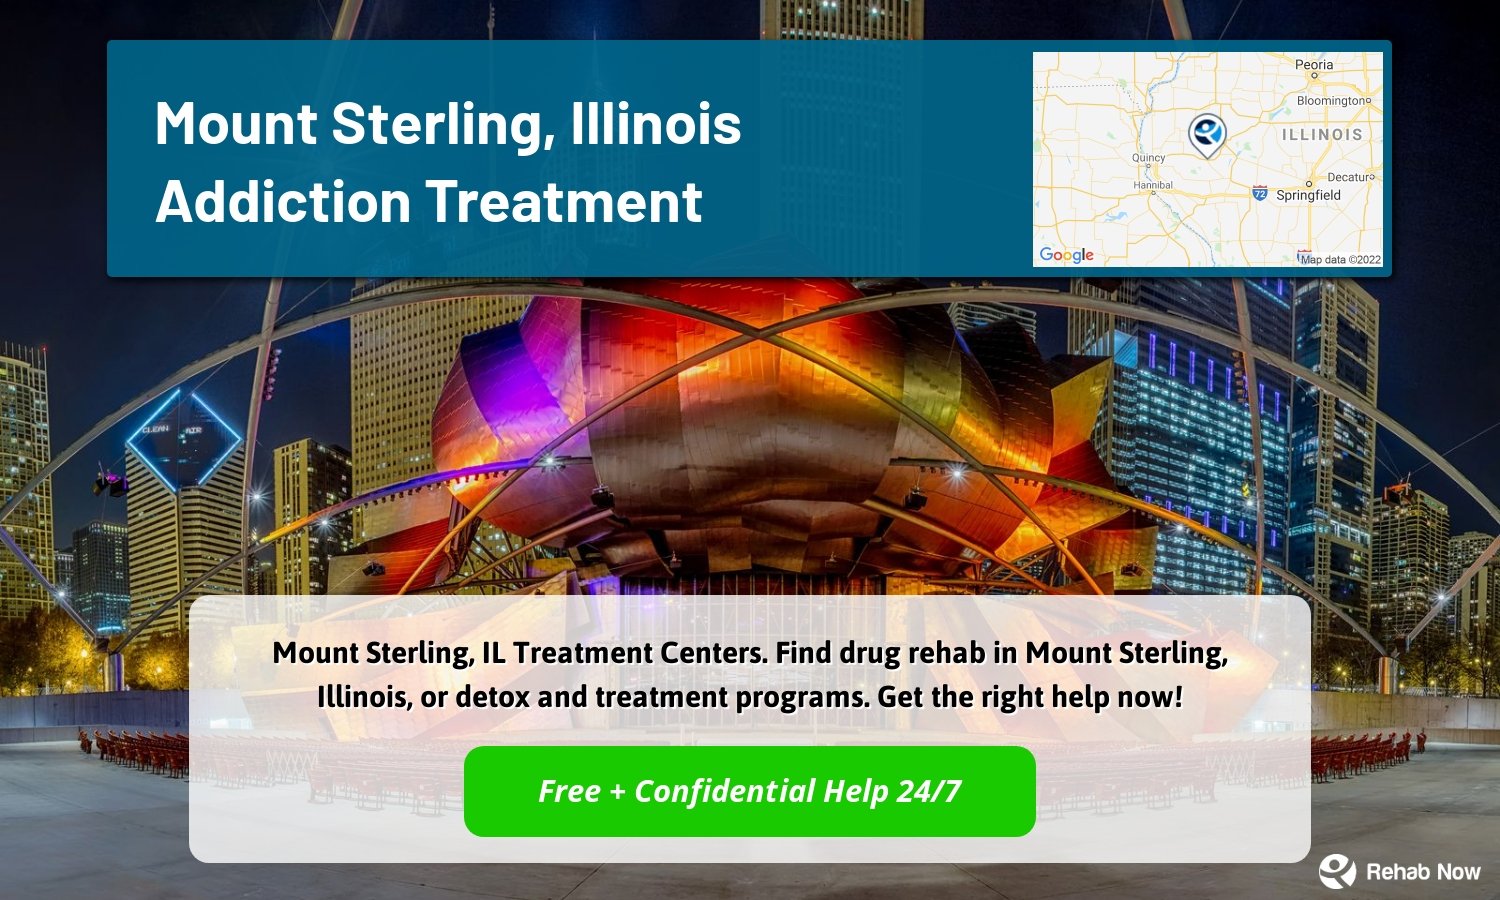 Mount Sterling, IL Treatment Centers. Find drug rehab in Mount Sterling, Illinois, or detox and treatment programs. Get the right help now!